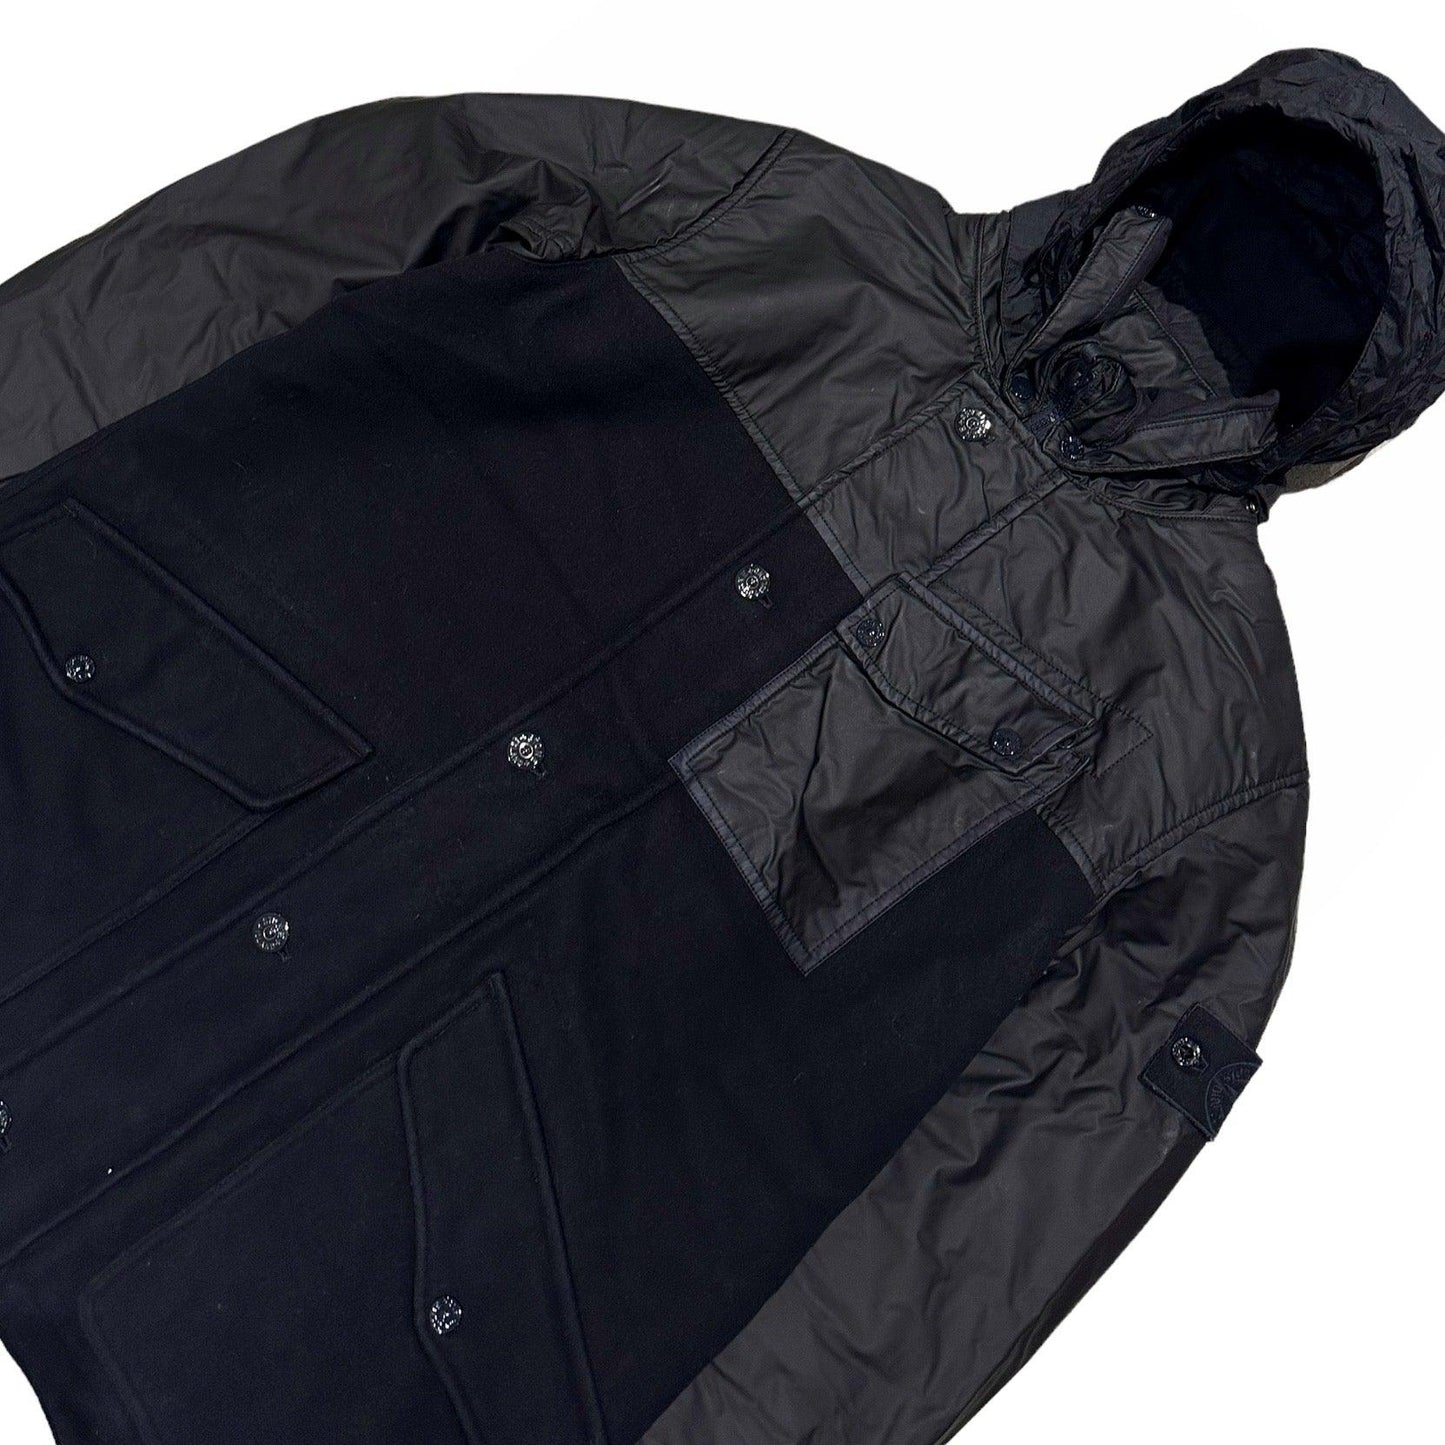 Stone Island Ghost Wool Nylon Quilted Jacket with Packable Hood - Known Source